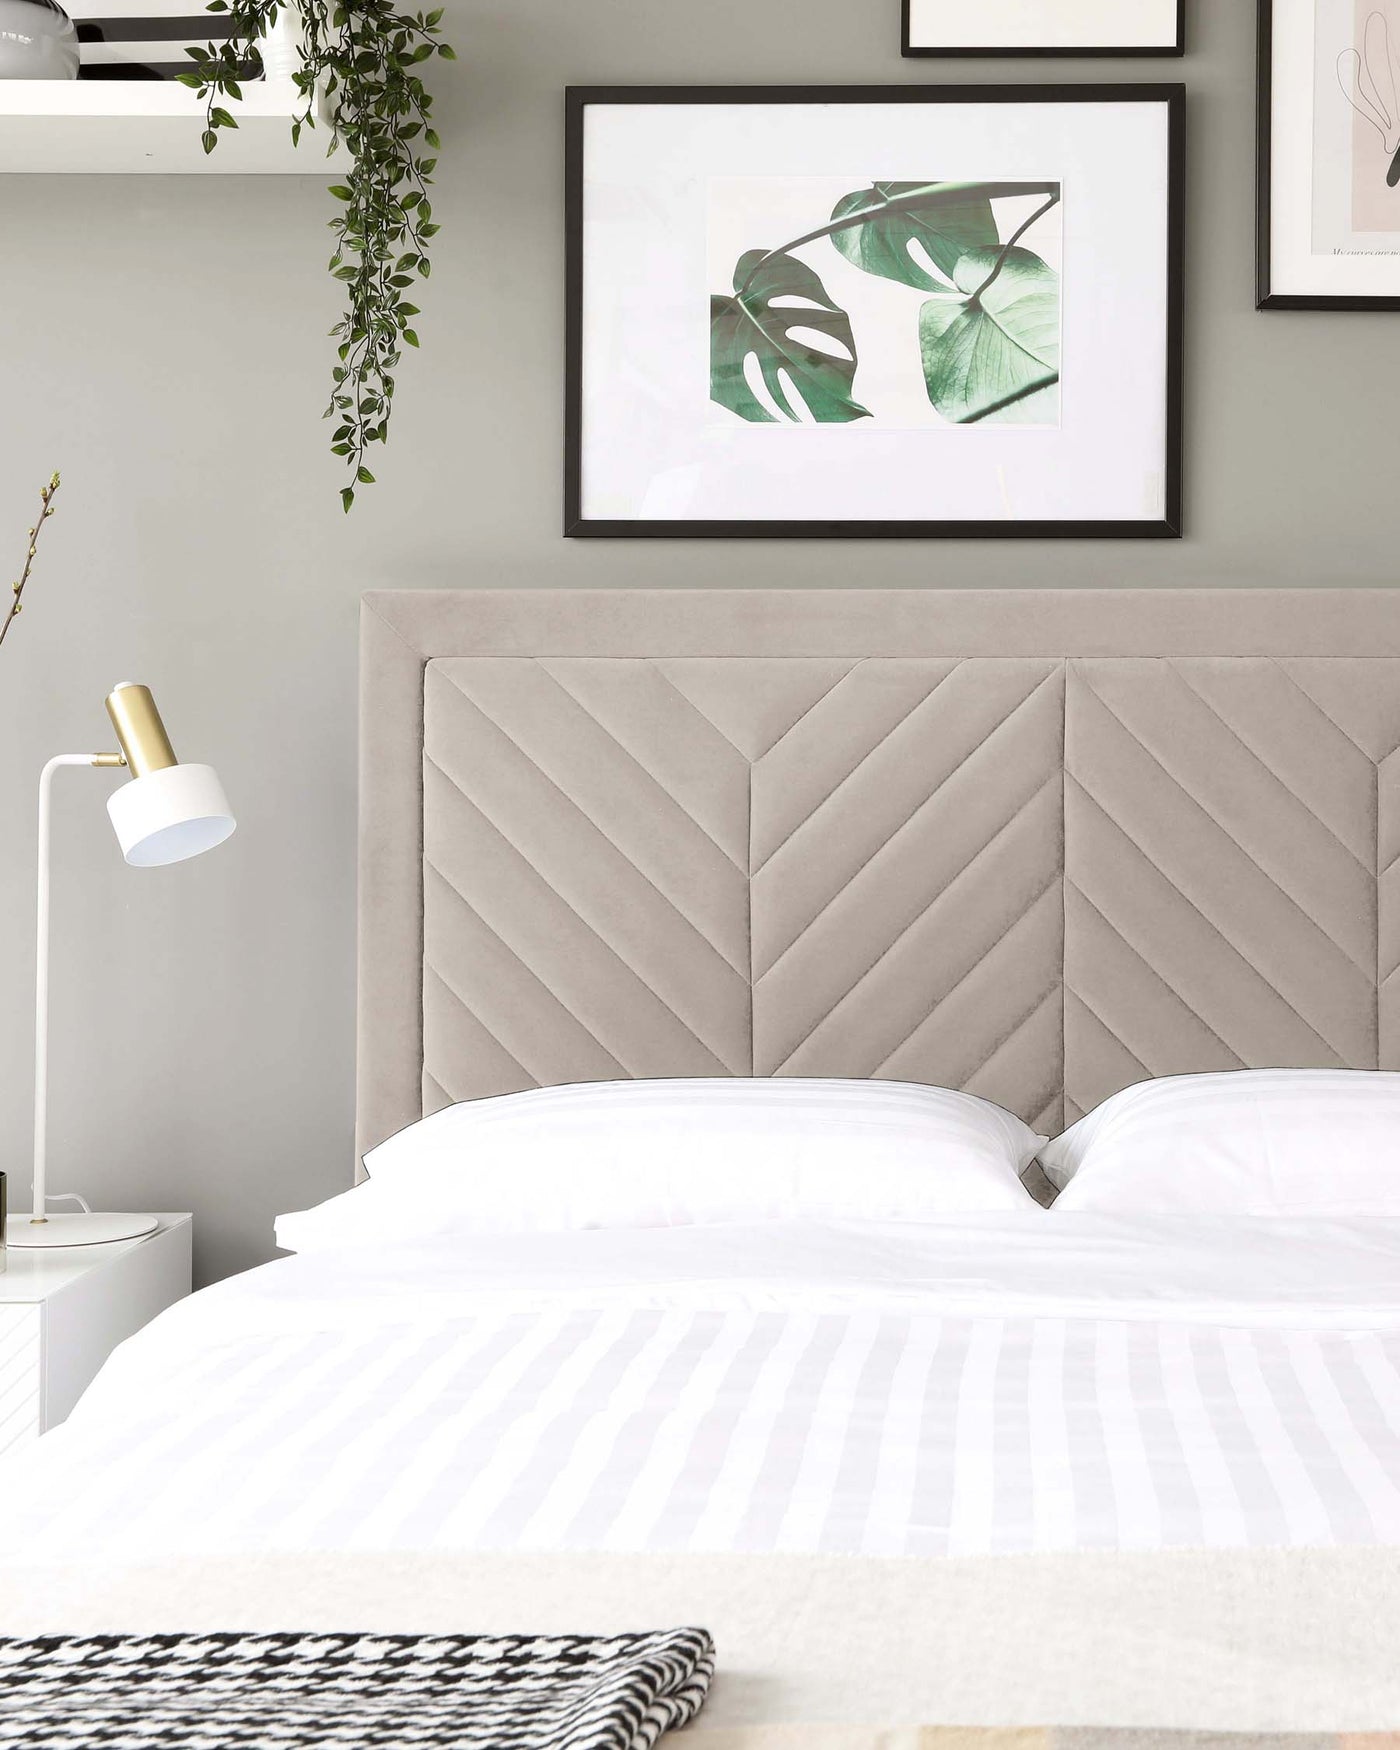 Elegant upholstered bed with a high, tufted headboard in a soft, neutral tone, paired with crisp white bedding and a sleek, minimalist white bedside table featuring a modern lamp with a brass accent.